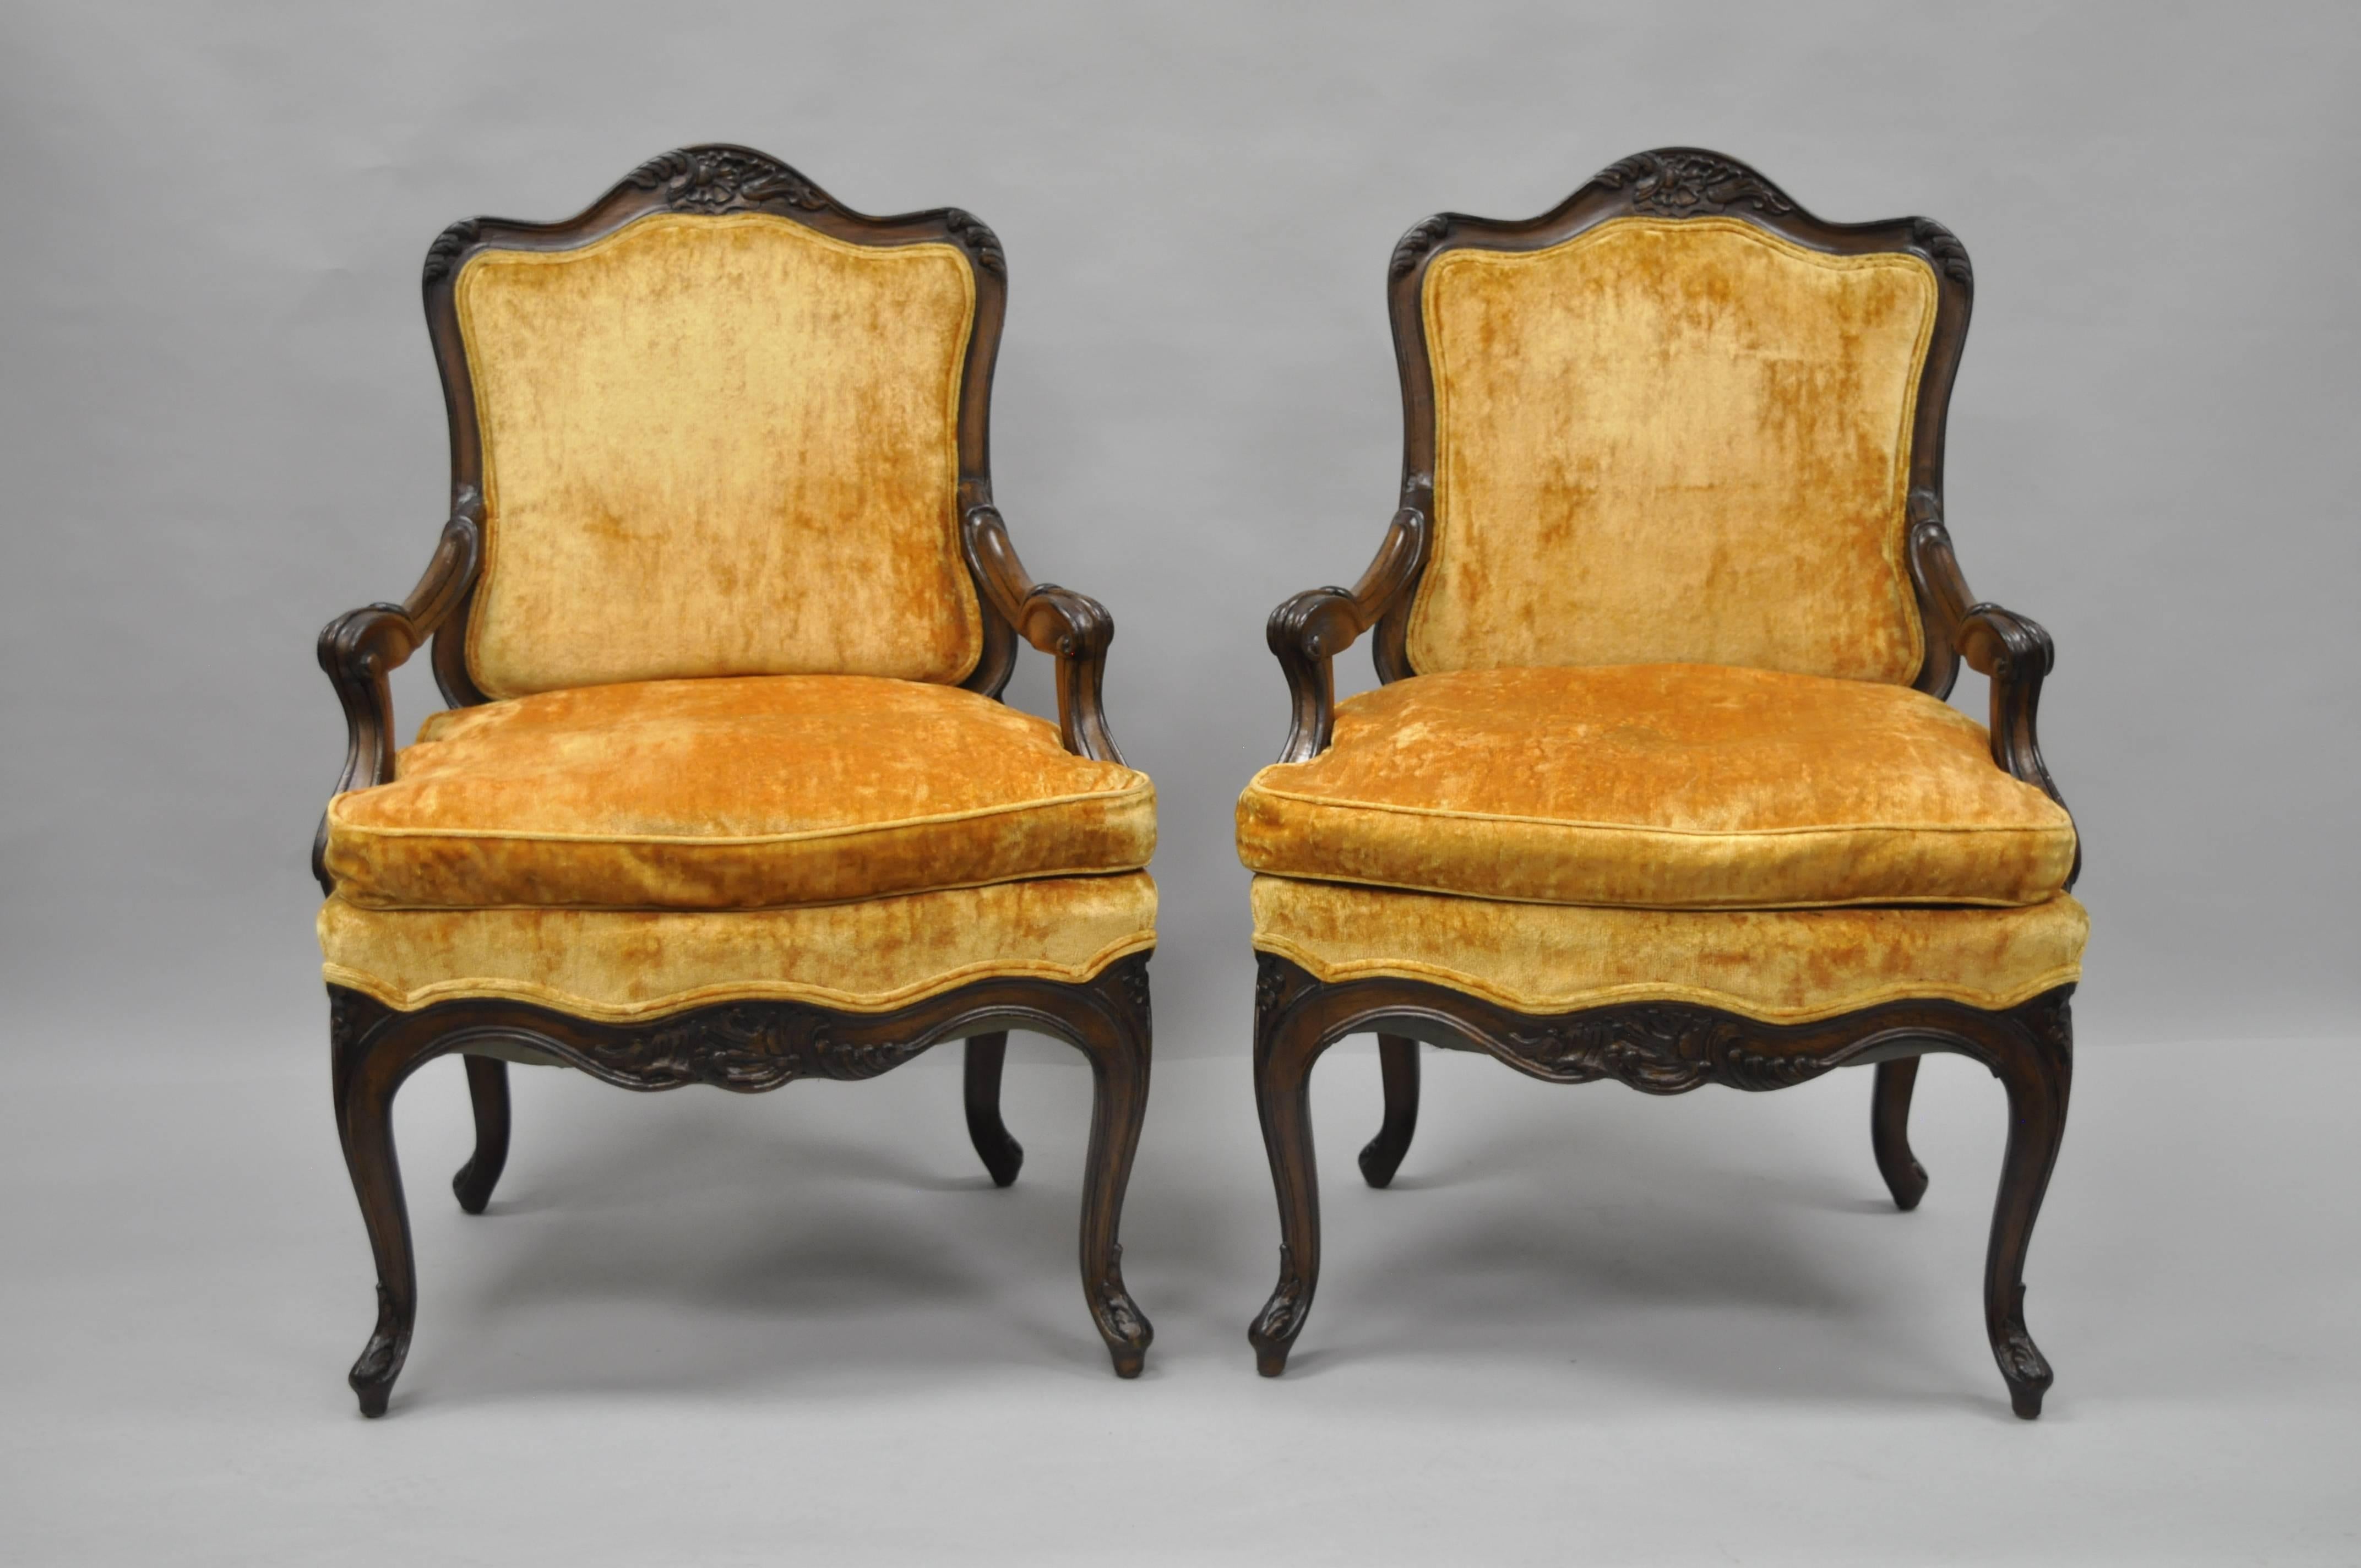 Pair of vintage country French/Louis XV style Hollywood Regency armchairs. Item features heavy solid wood frames, shapely rolled arms, cabriole legs, carved upper and lower rail, and a dark stained distressed finish. Measurements: 39